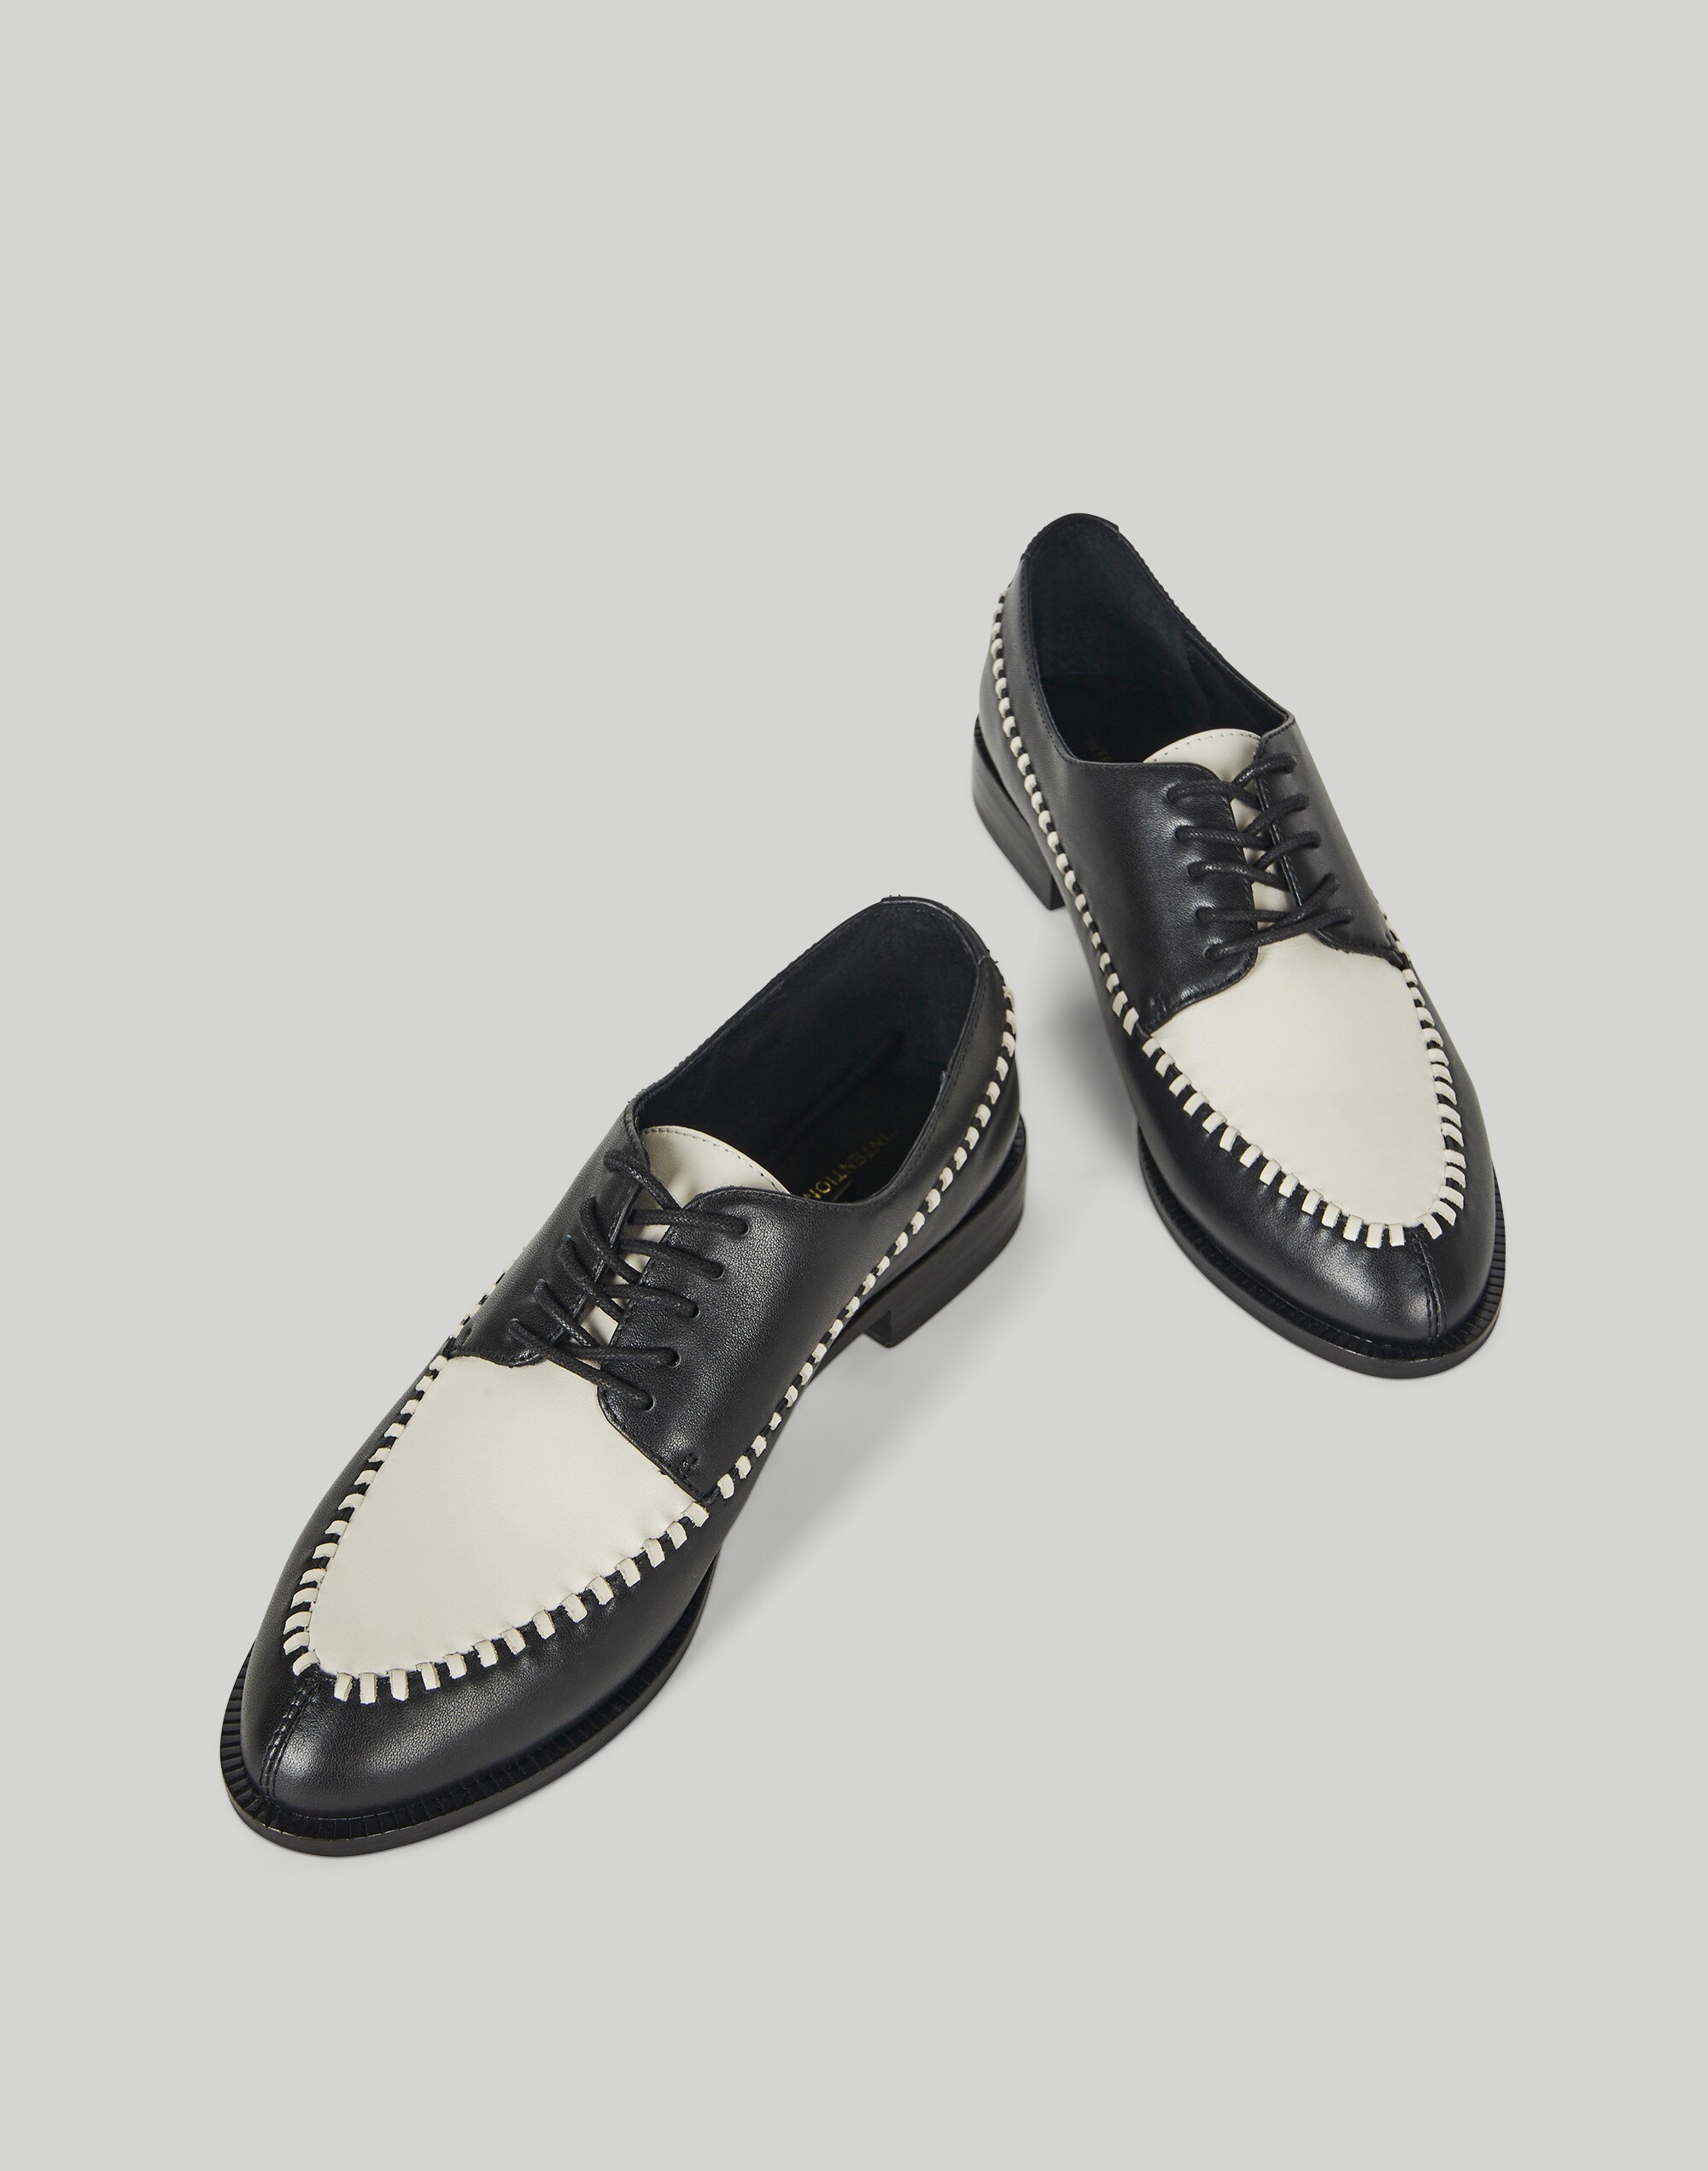 Intentionally Blank Saintly Oxfords